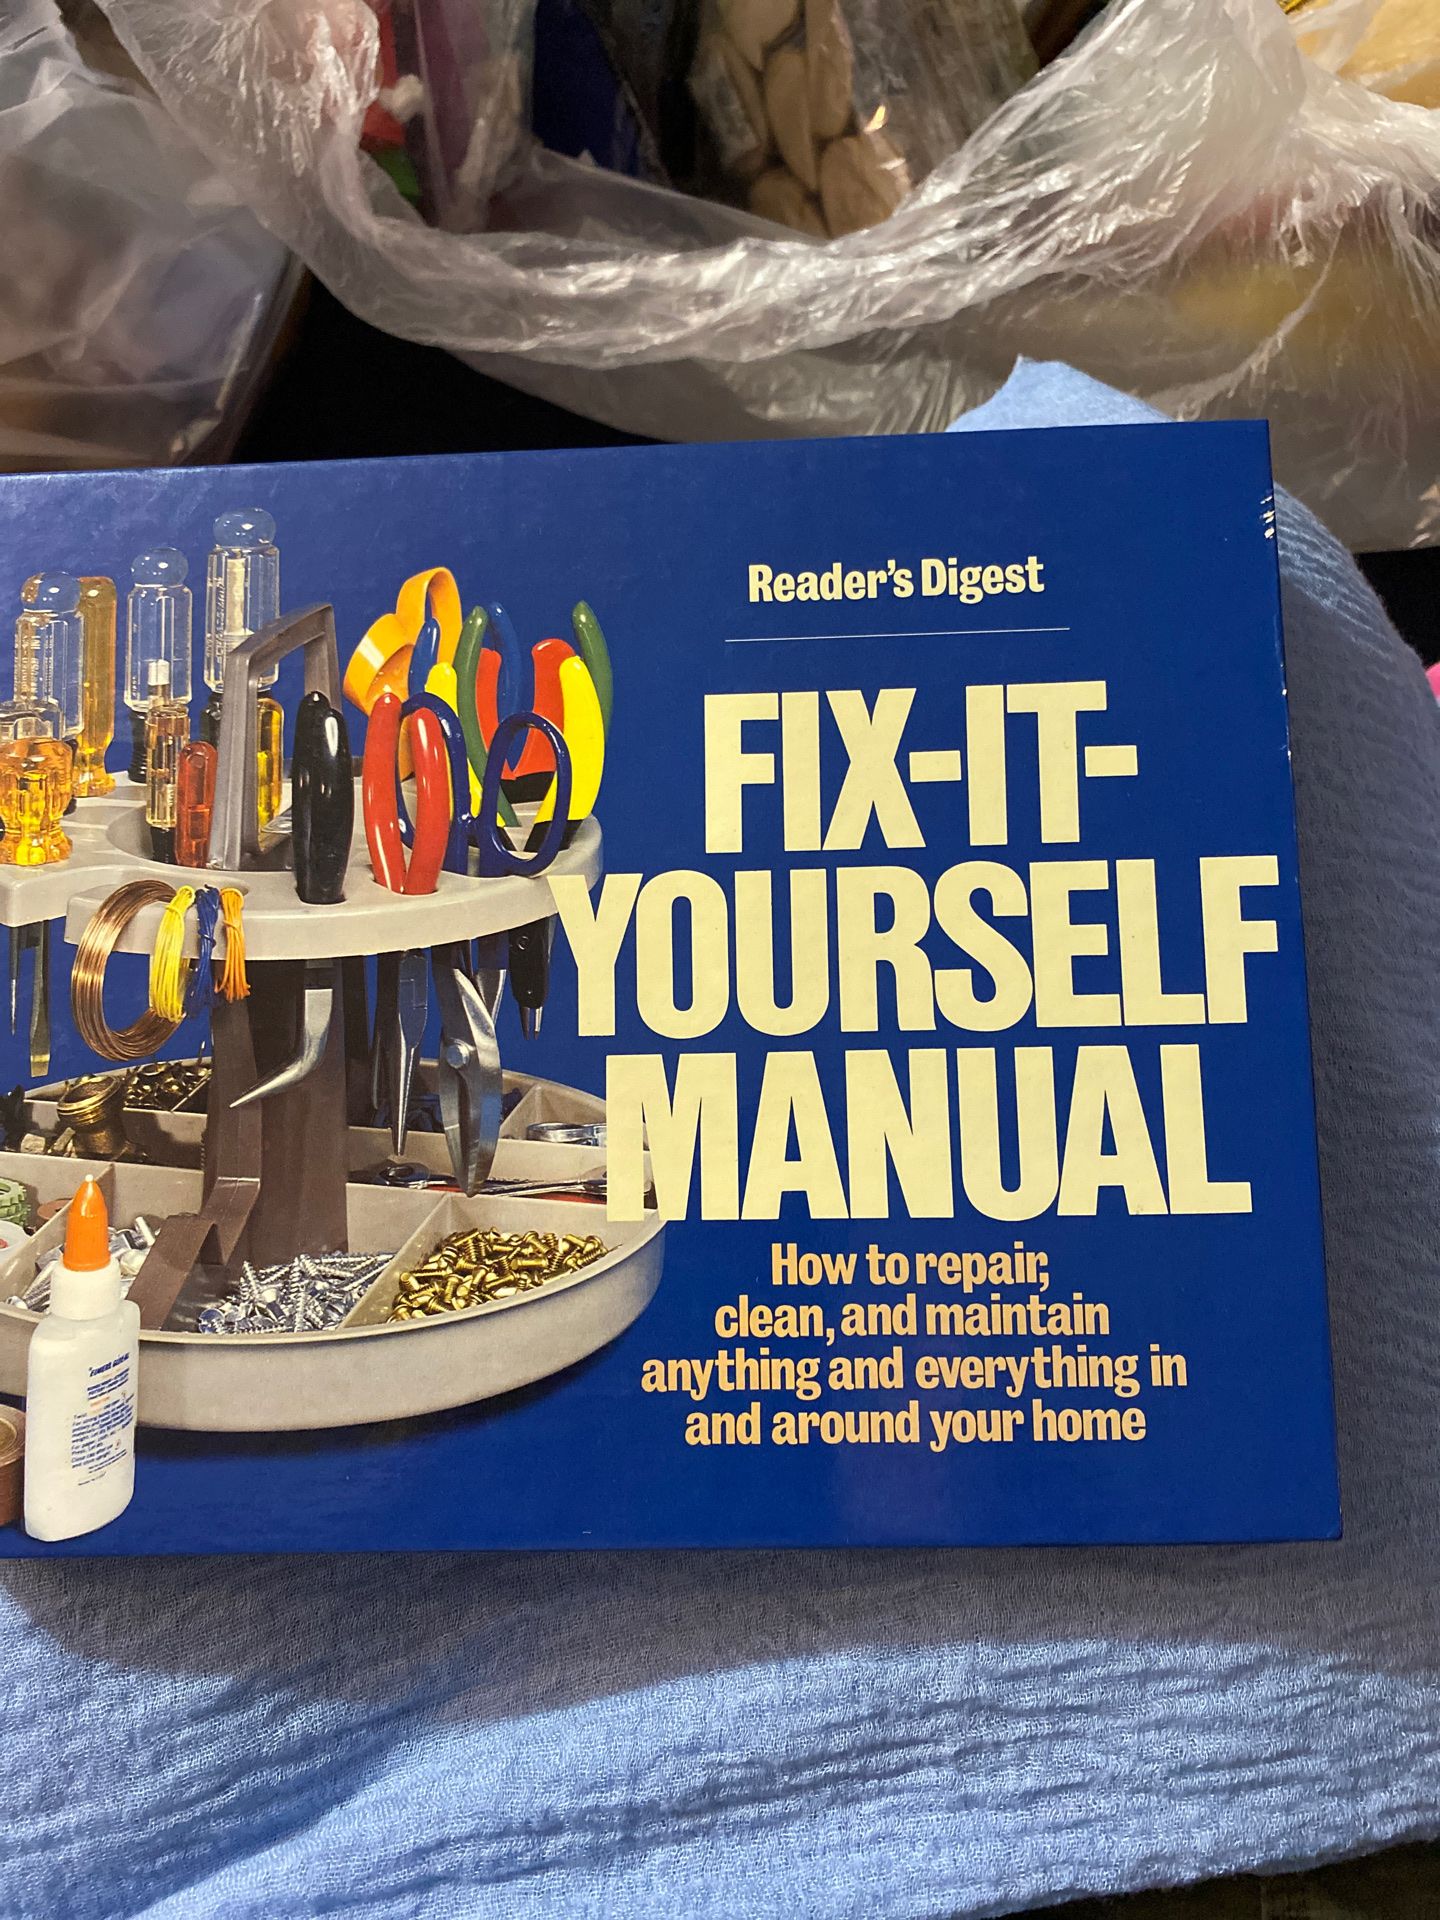 Fix it yourself manual book